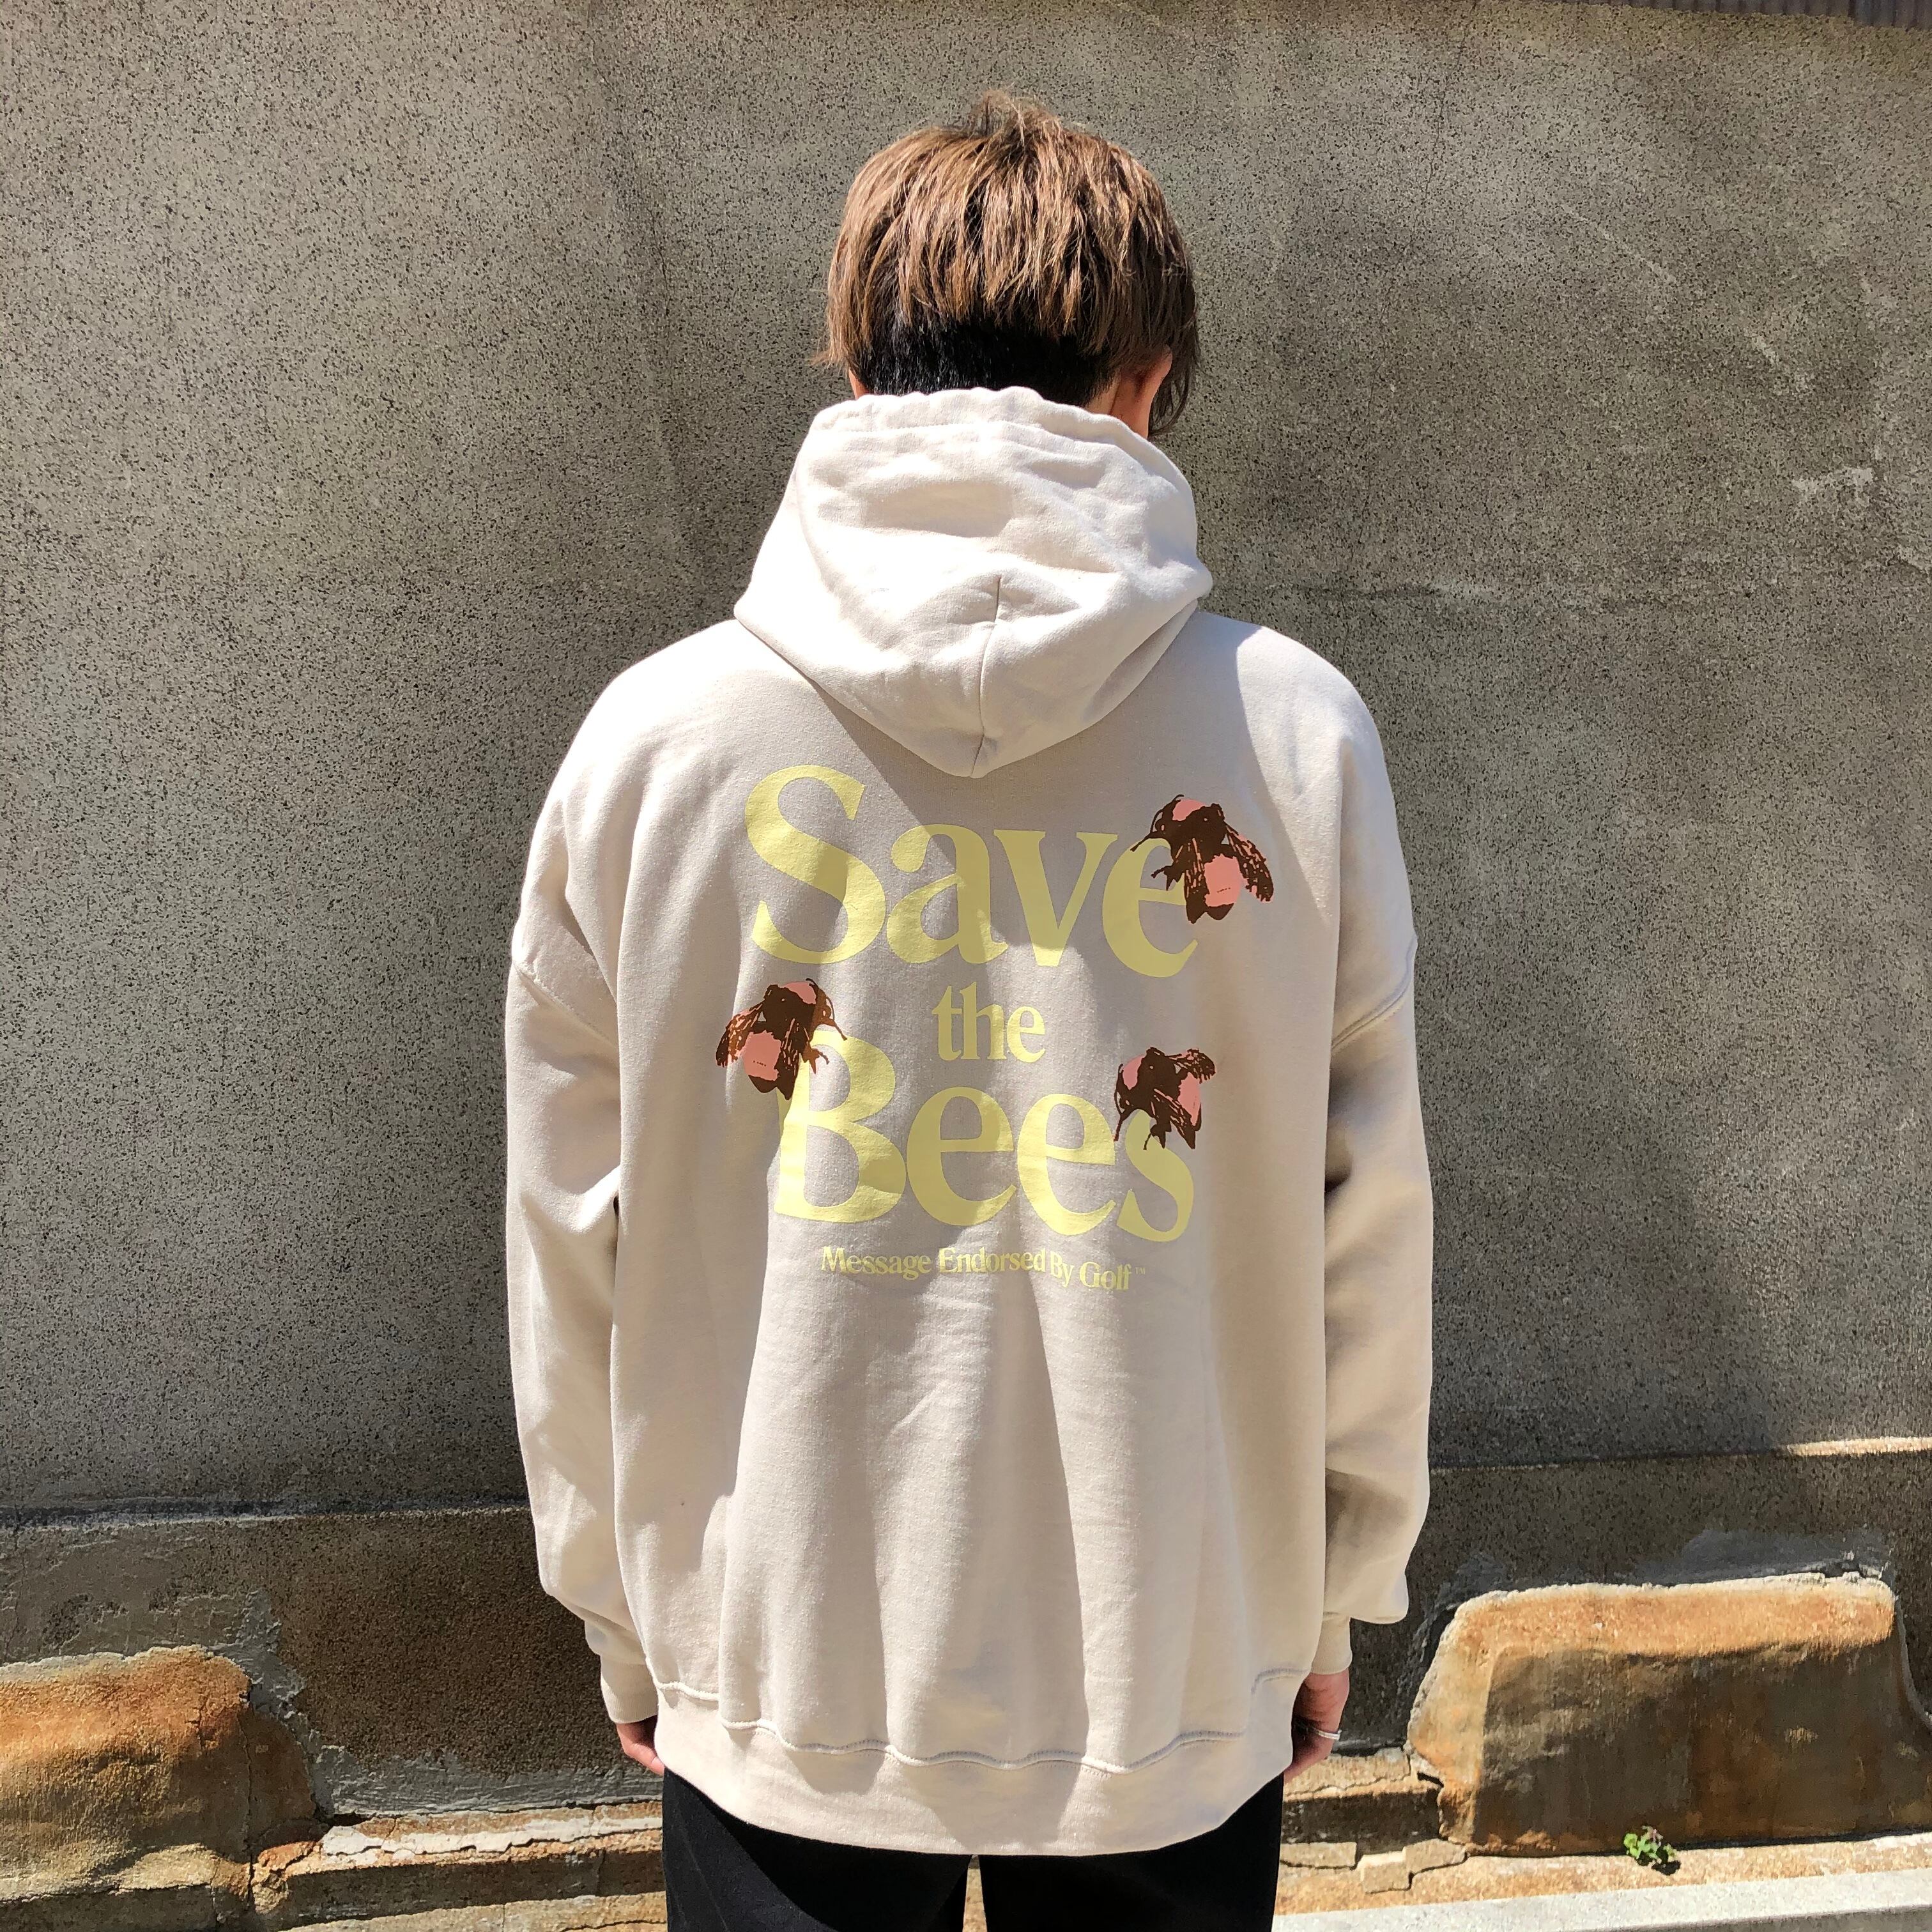 BUTTERFLY HOODIE by GOLF WANG新品未使用